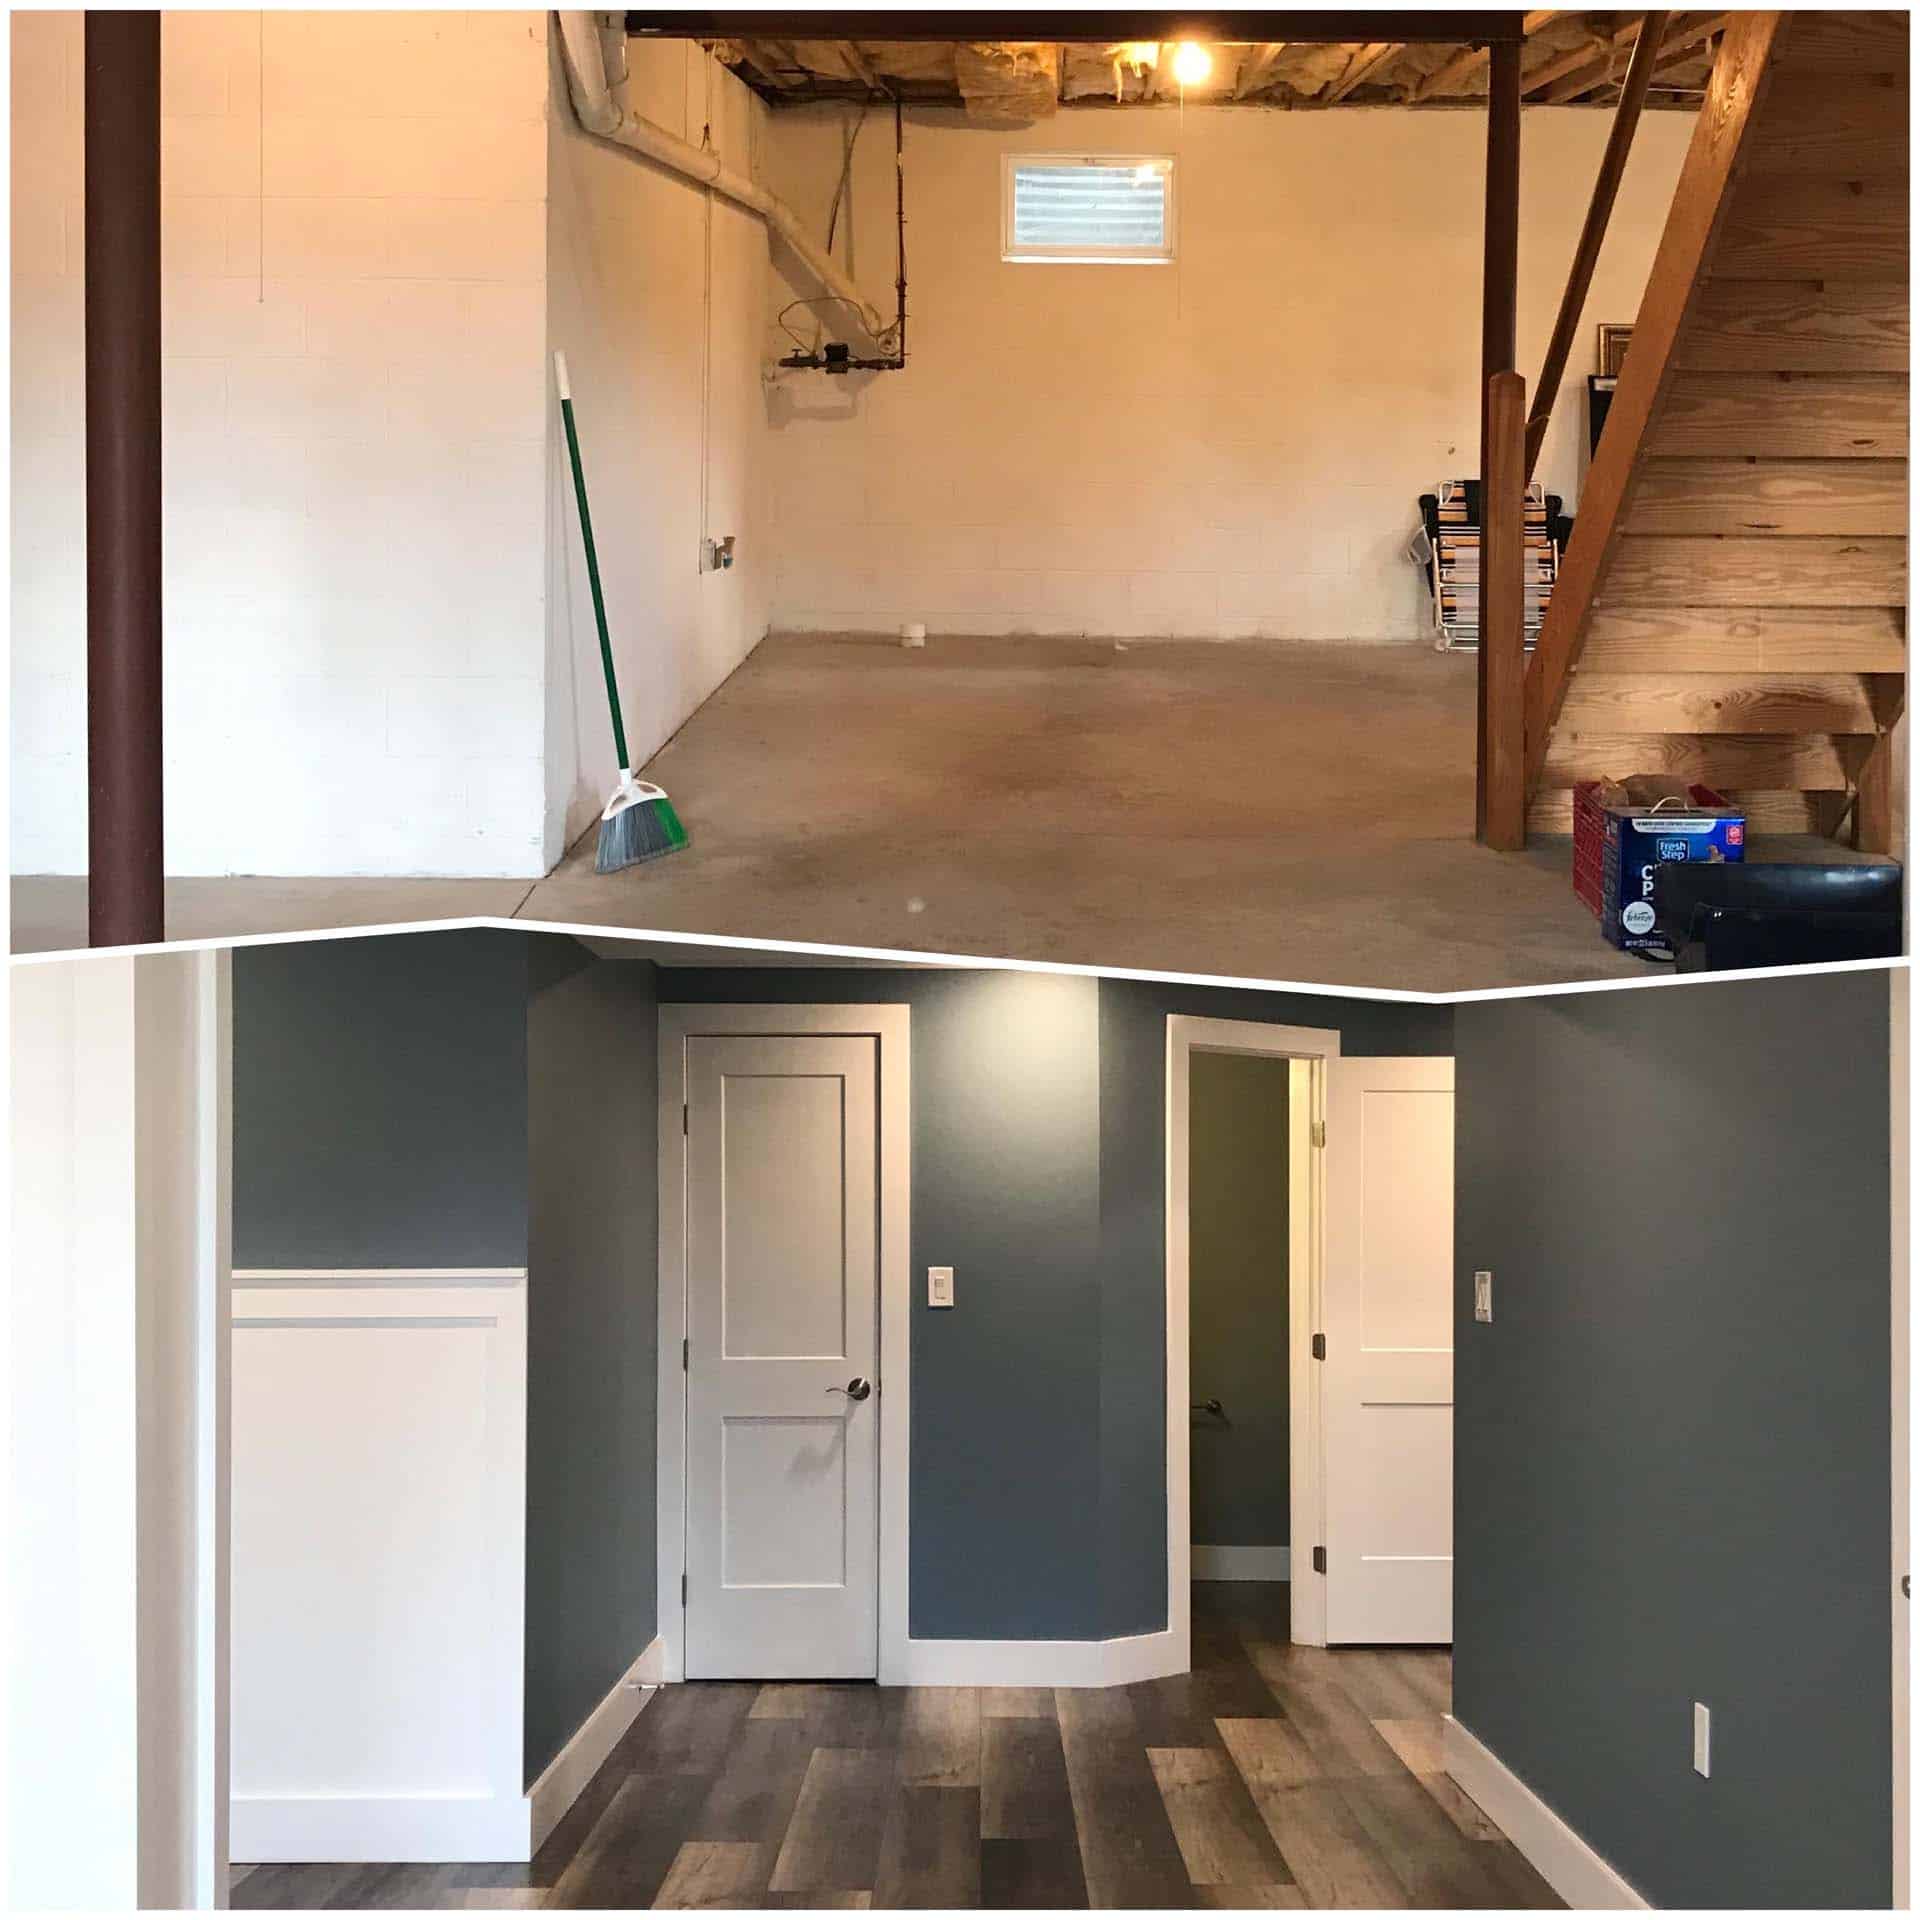 Basement before and after remodeling